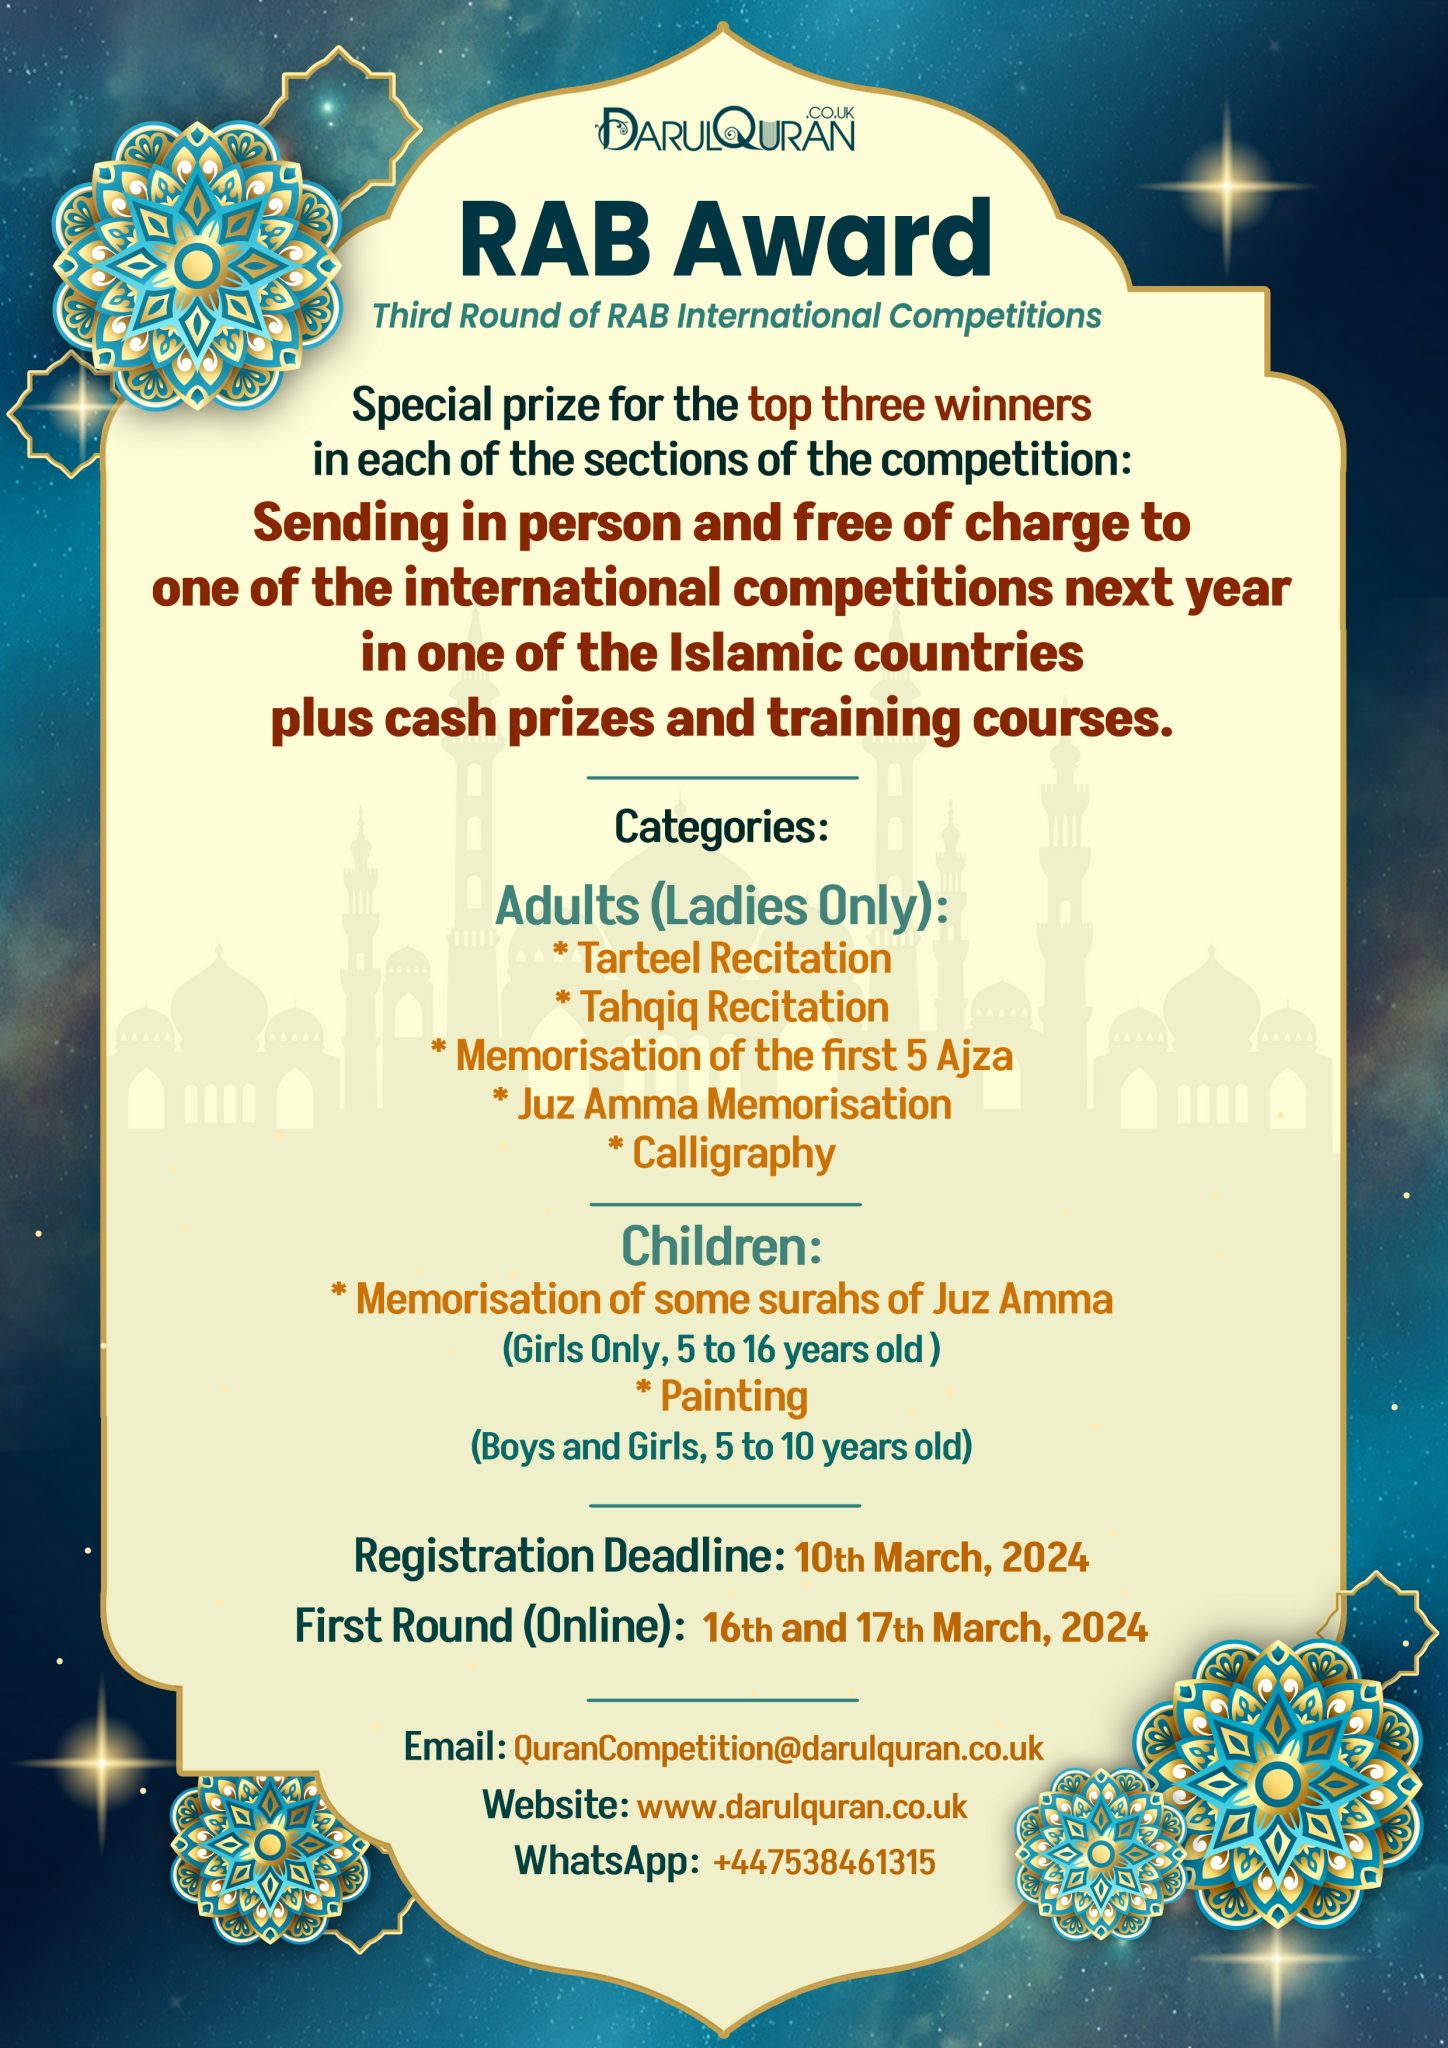 Quran Competition 3rd RAB International Competitions 2024 DarulQuran